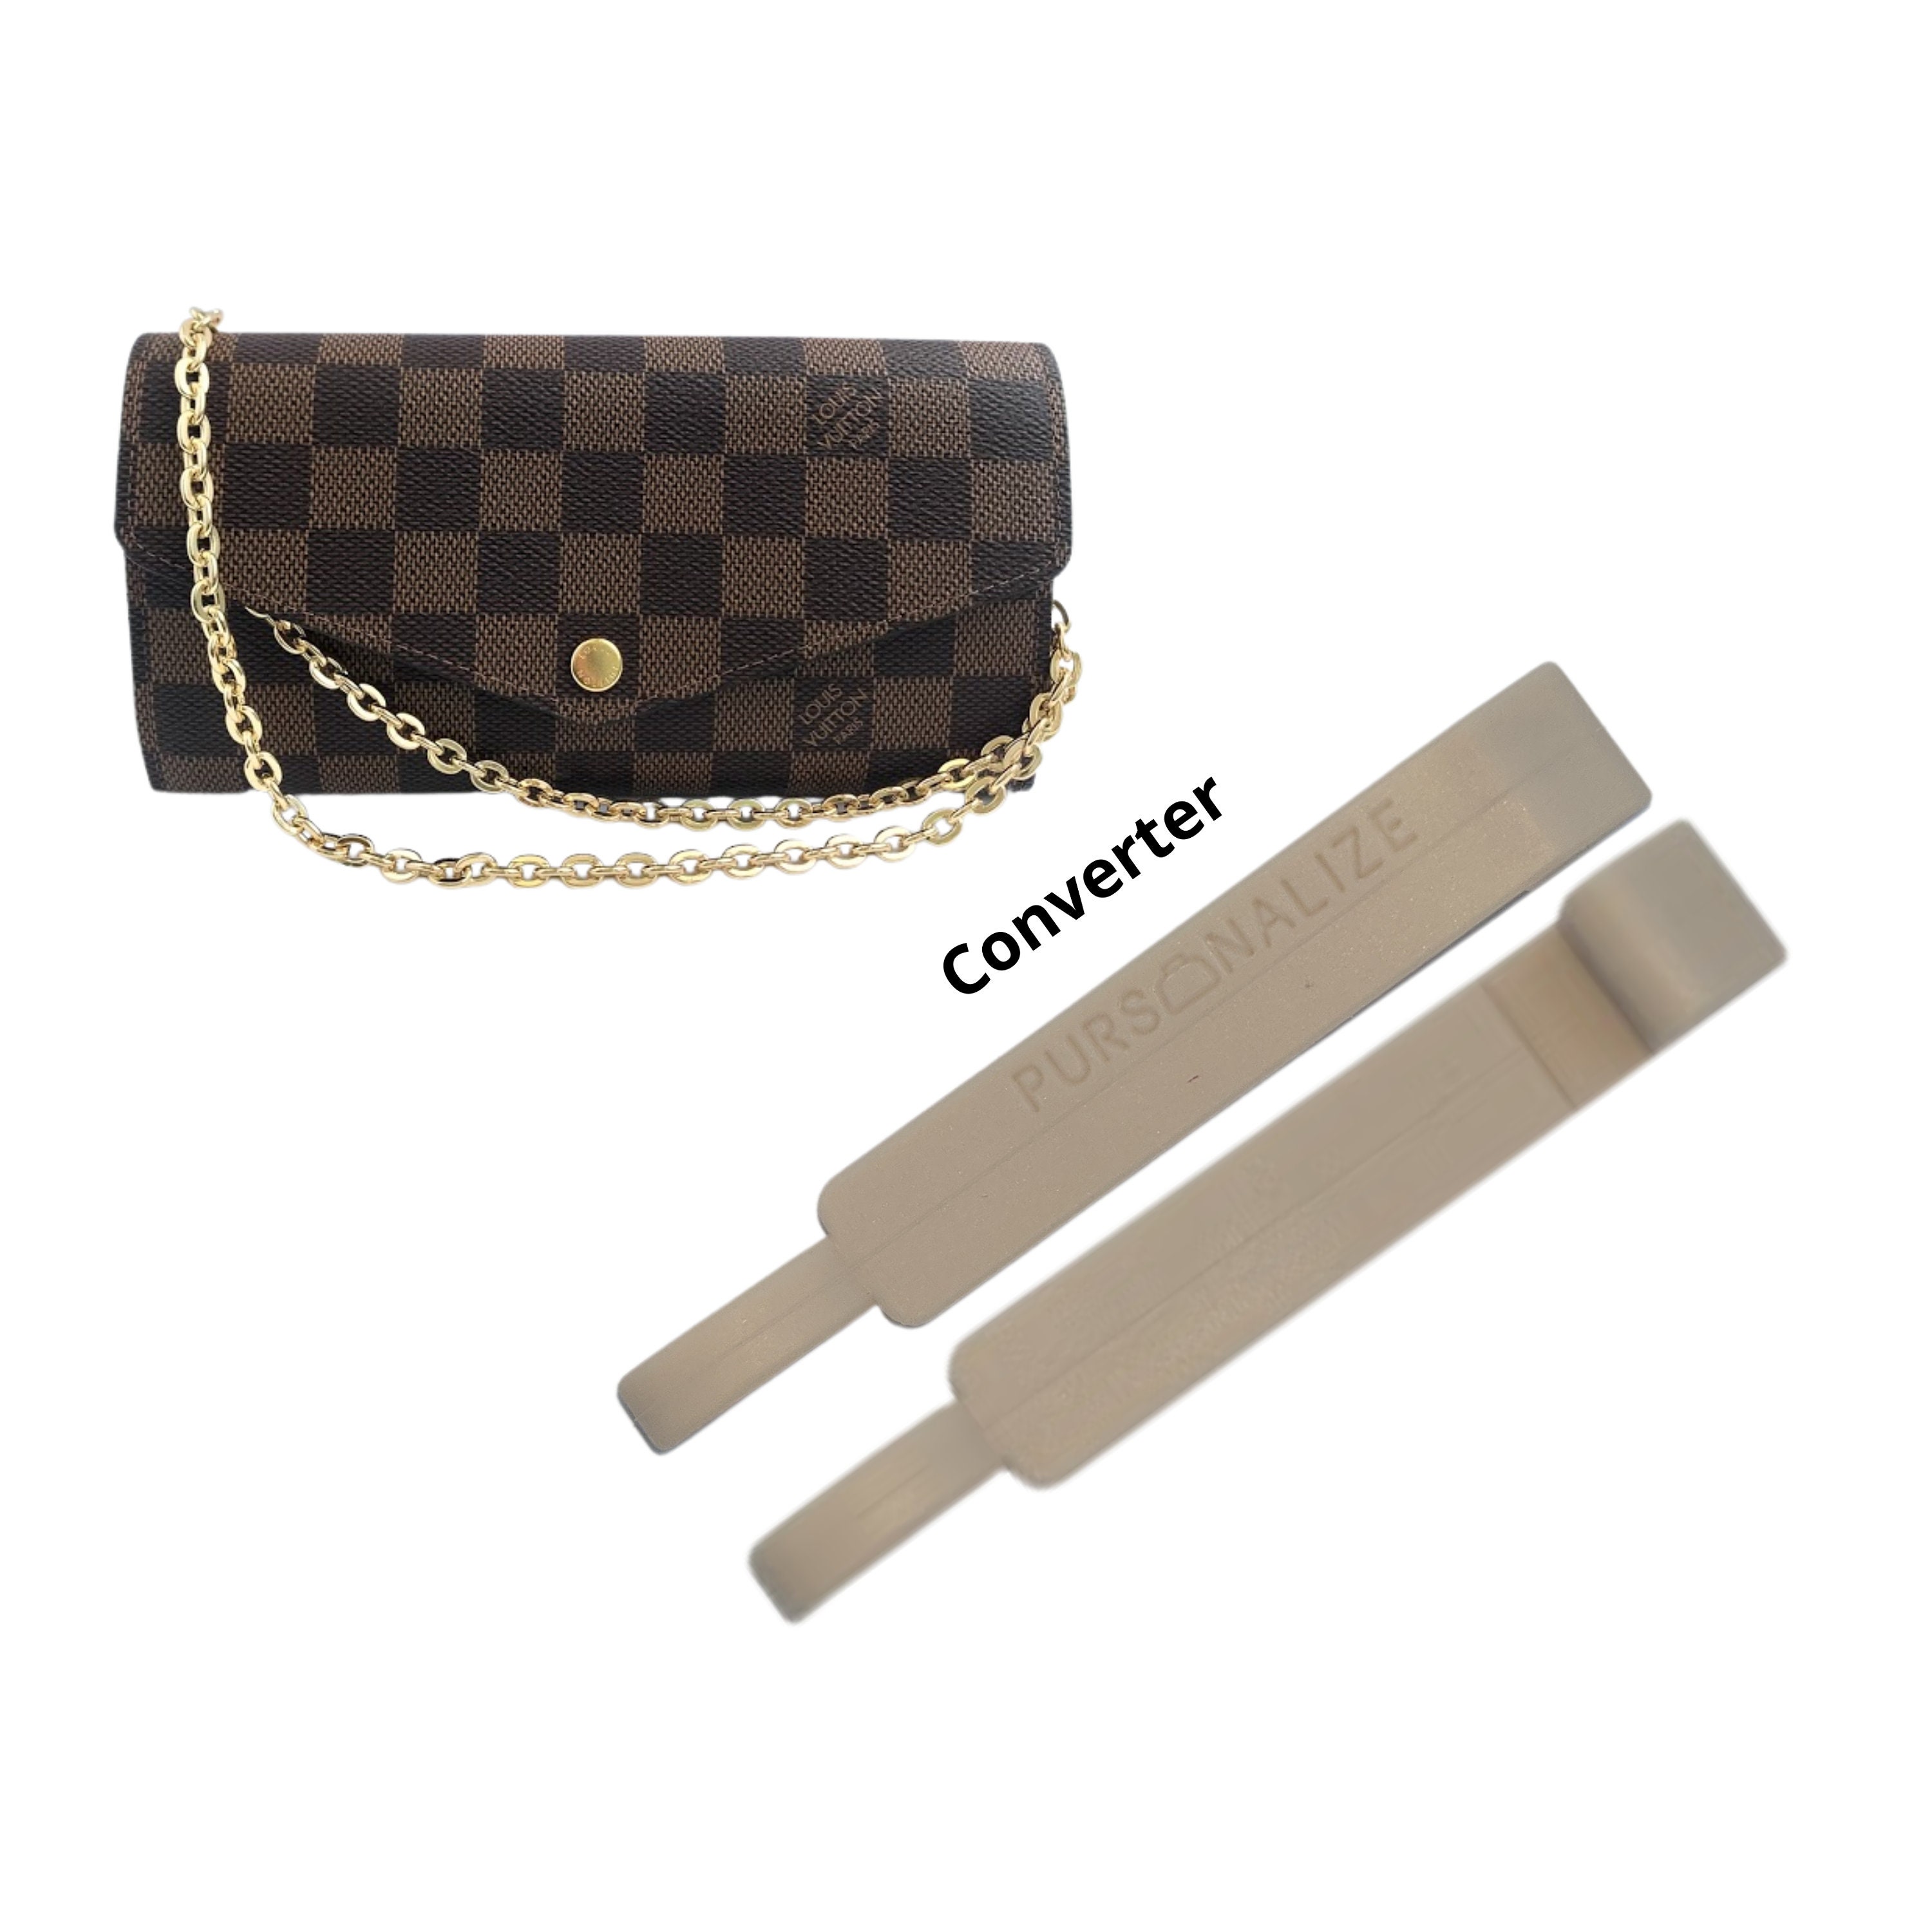  purse insert conversion kit - for LV Wallet Sarah bag, handbag  accessories, inner bag organizer, 3015- brown : Clothing, Shoes & Jewelry